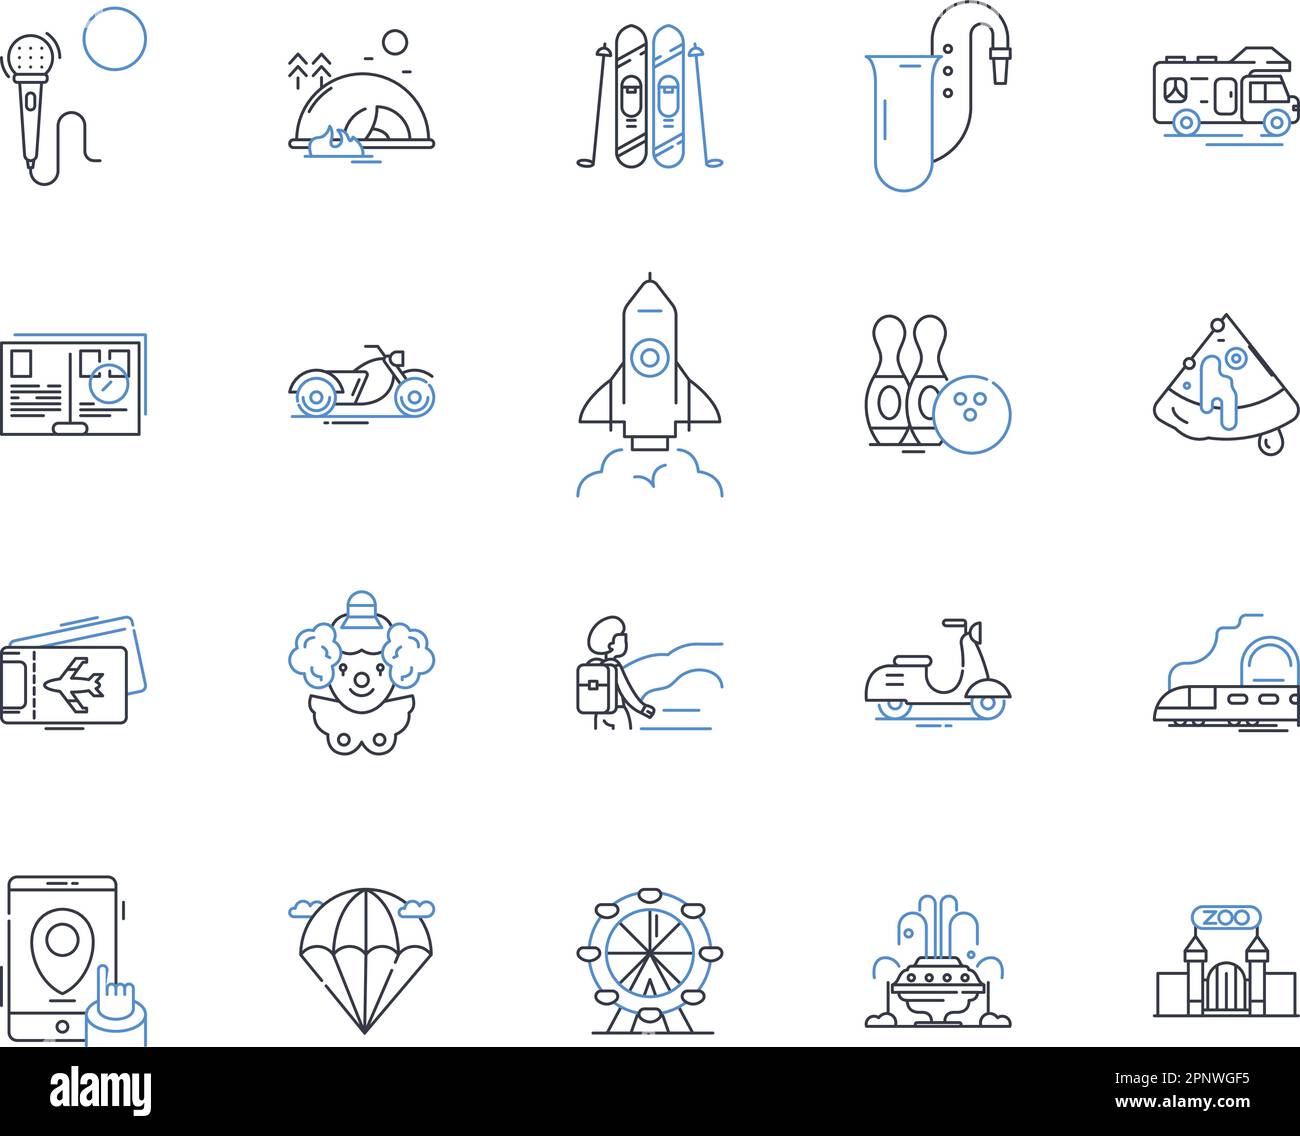 Escapade line icons collection. Adventure, Thrill, Excitement, Journey, Discovery, Expedition, Exploration vector and linear illustration. Quest Stock Vector